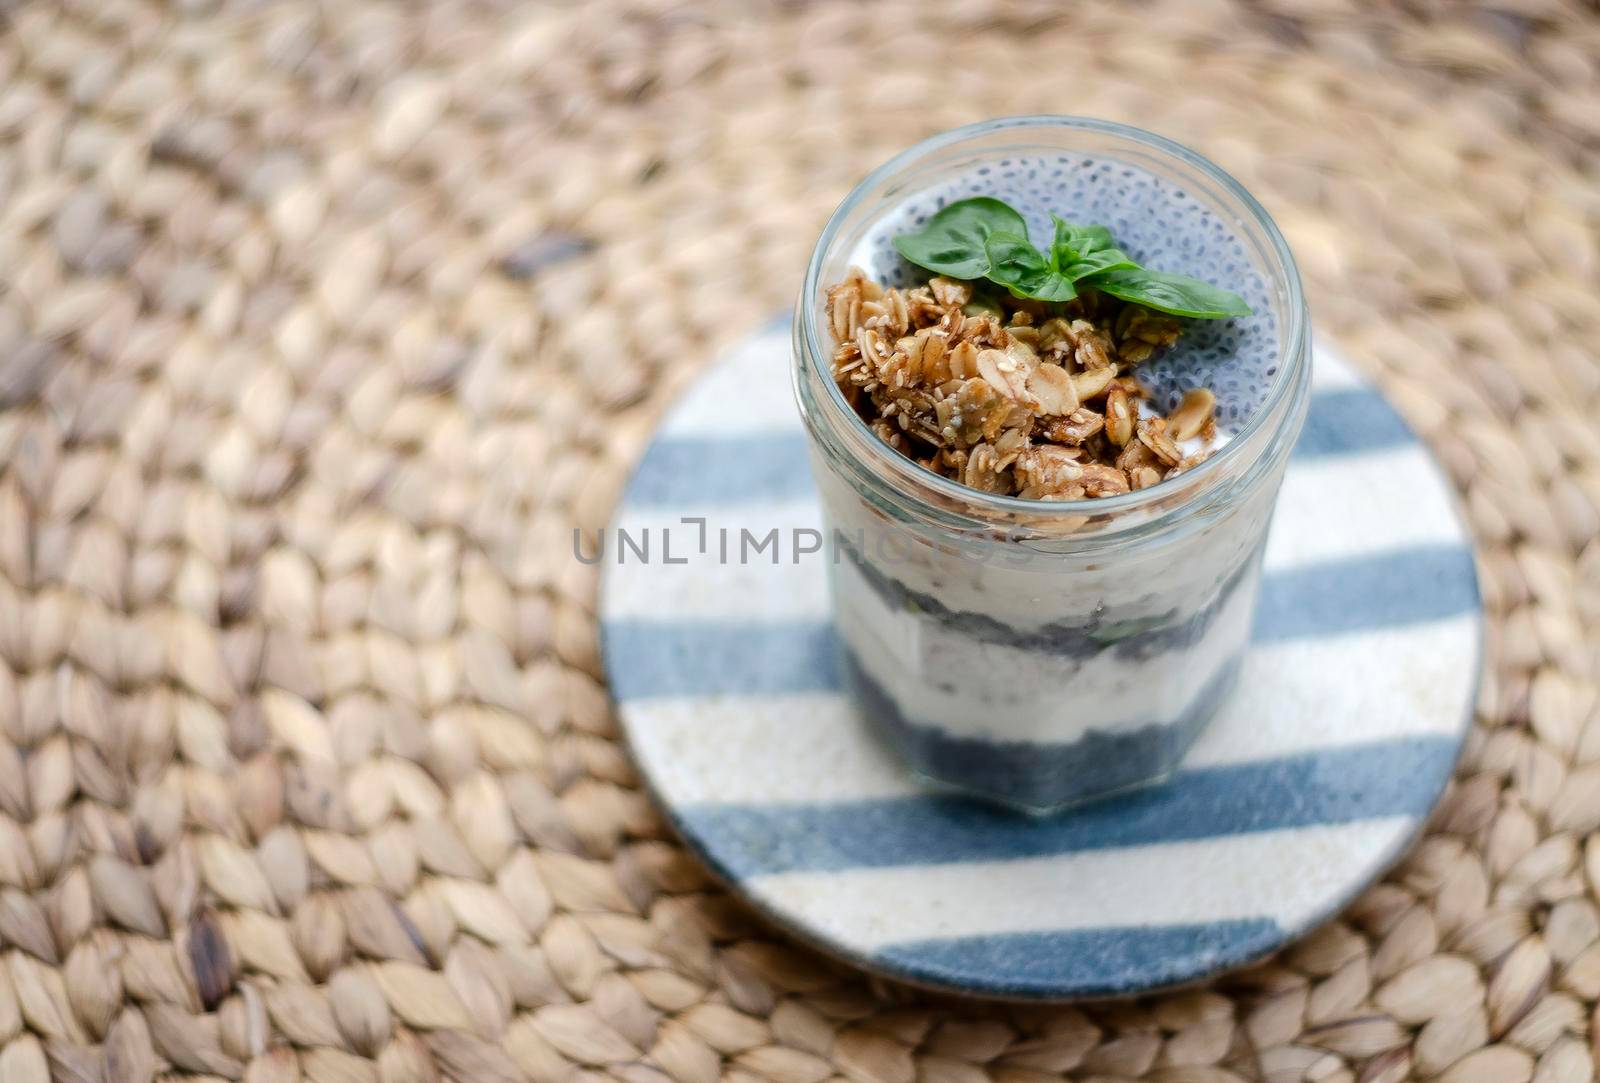 homemade healthy rustic yoghurt and granola breakfast snack cup by jackmalipan